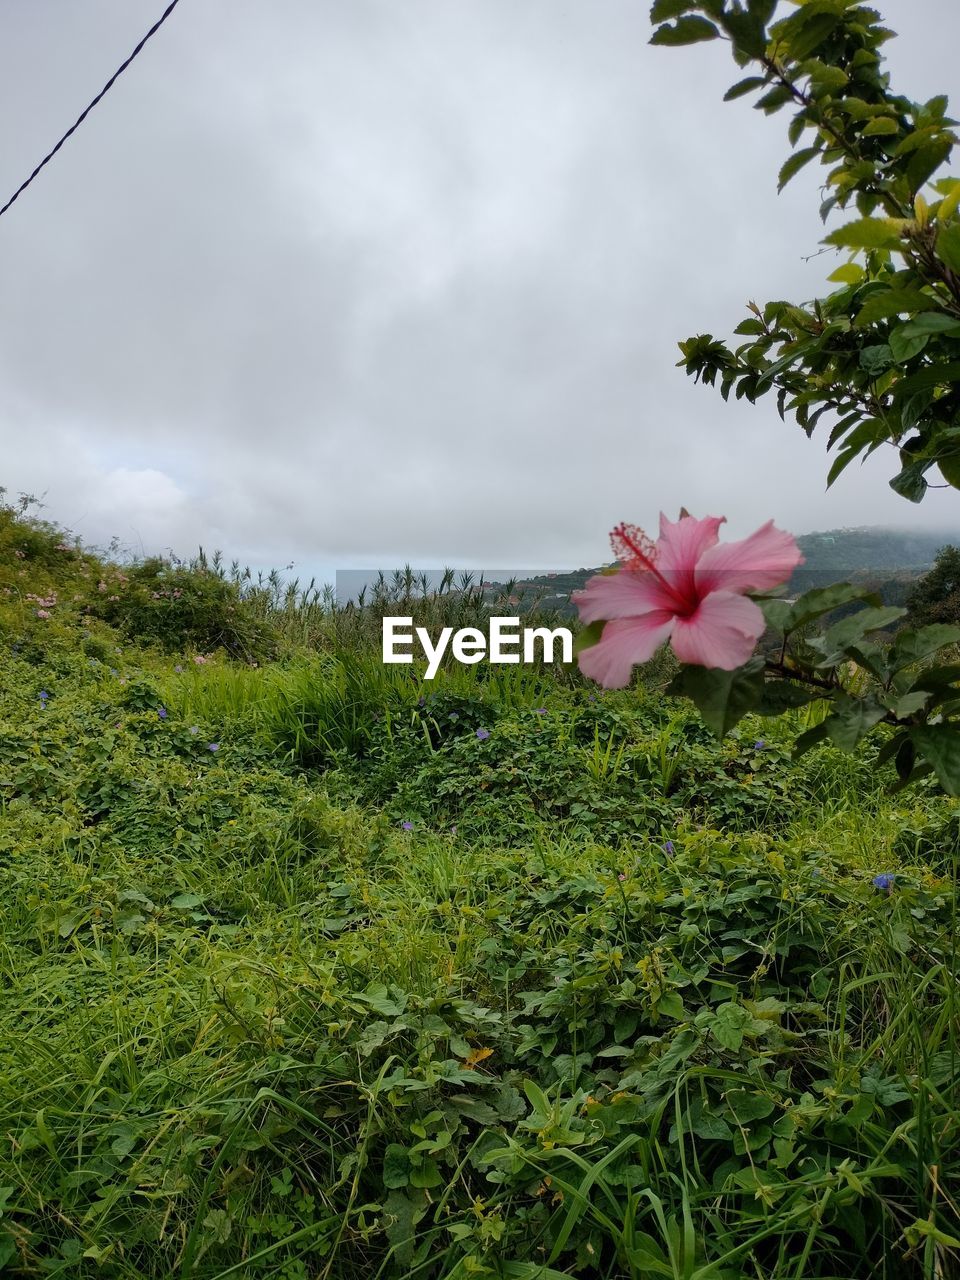 plant, flower, flowering plant, nature, beauty in nature, grass, cloud, freshness, sky, leaf, growth, green, pink, meadow, fragility, tree, petal, no people, wildflower, outdoors, day, flower head, environment, inflorescence, land, plant part, blossom, close-up, vegetation, field, landscape, springtime